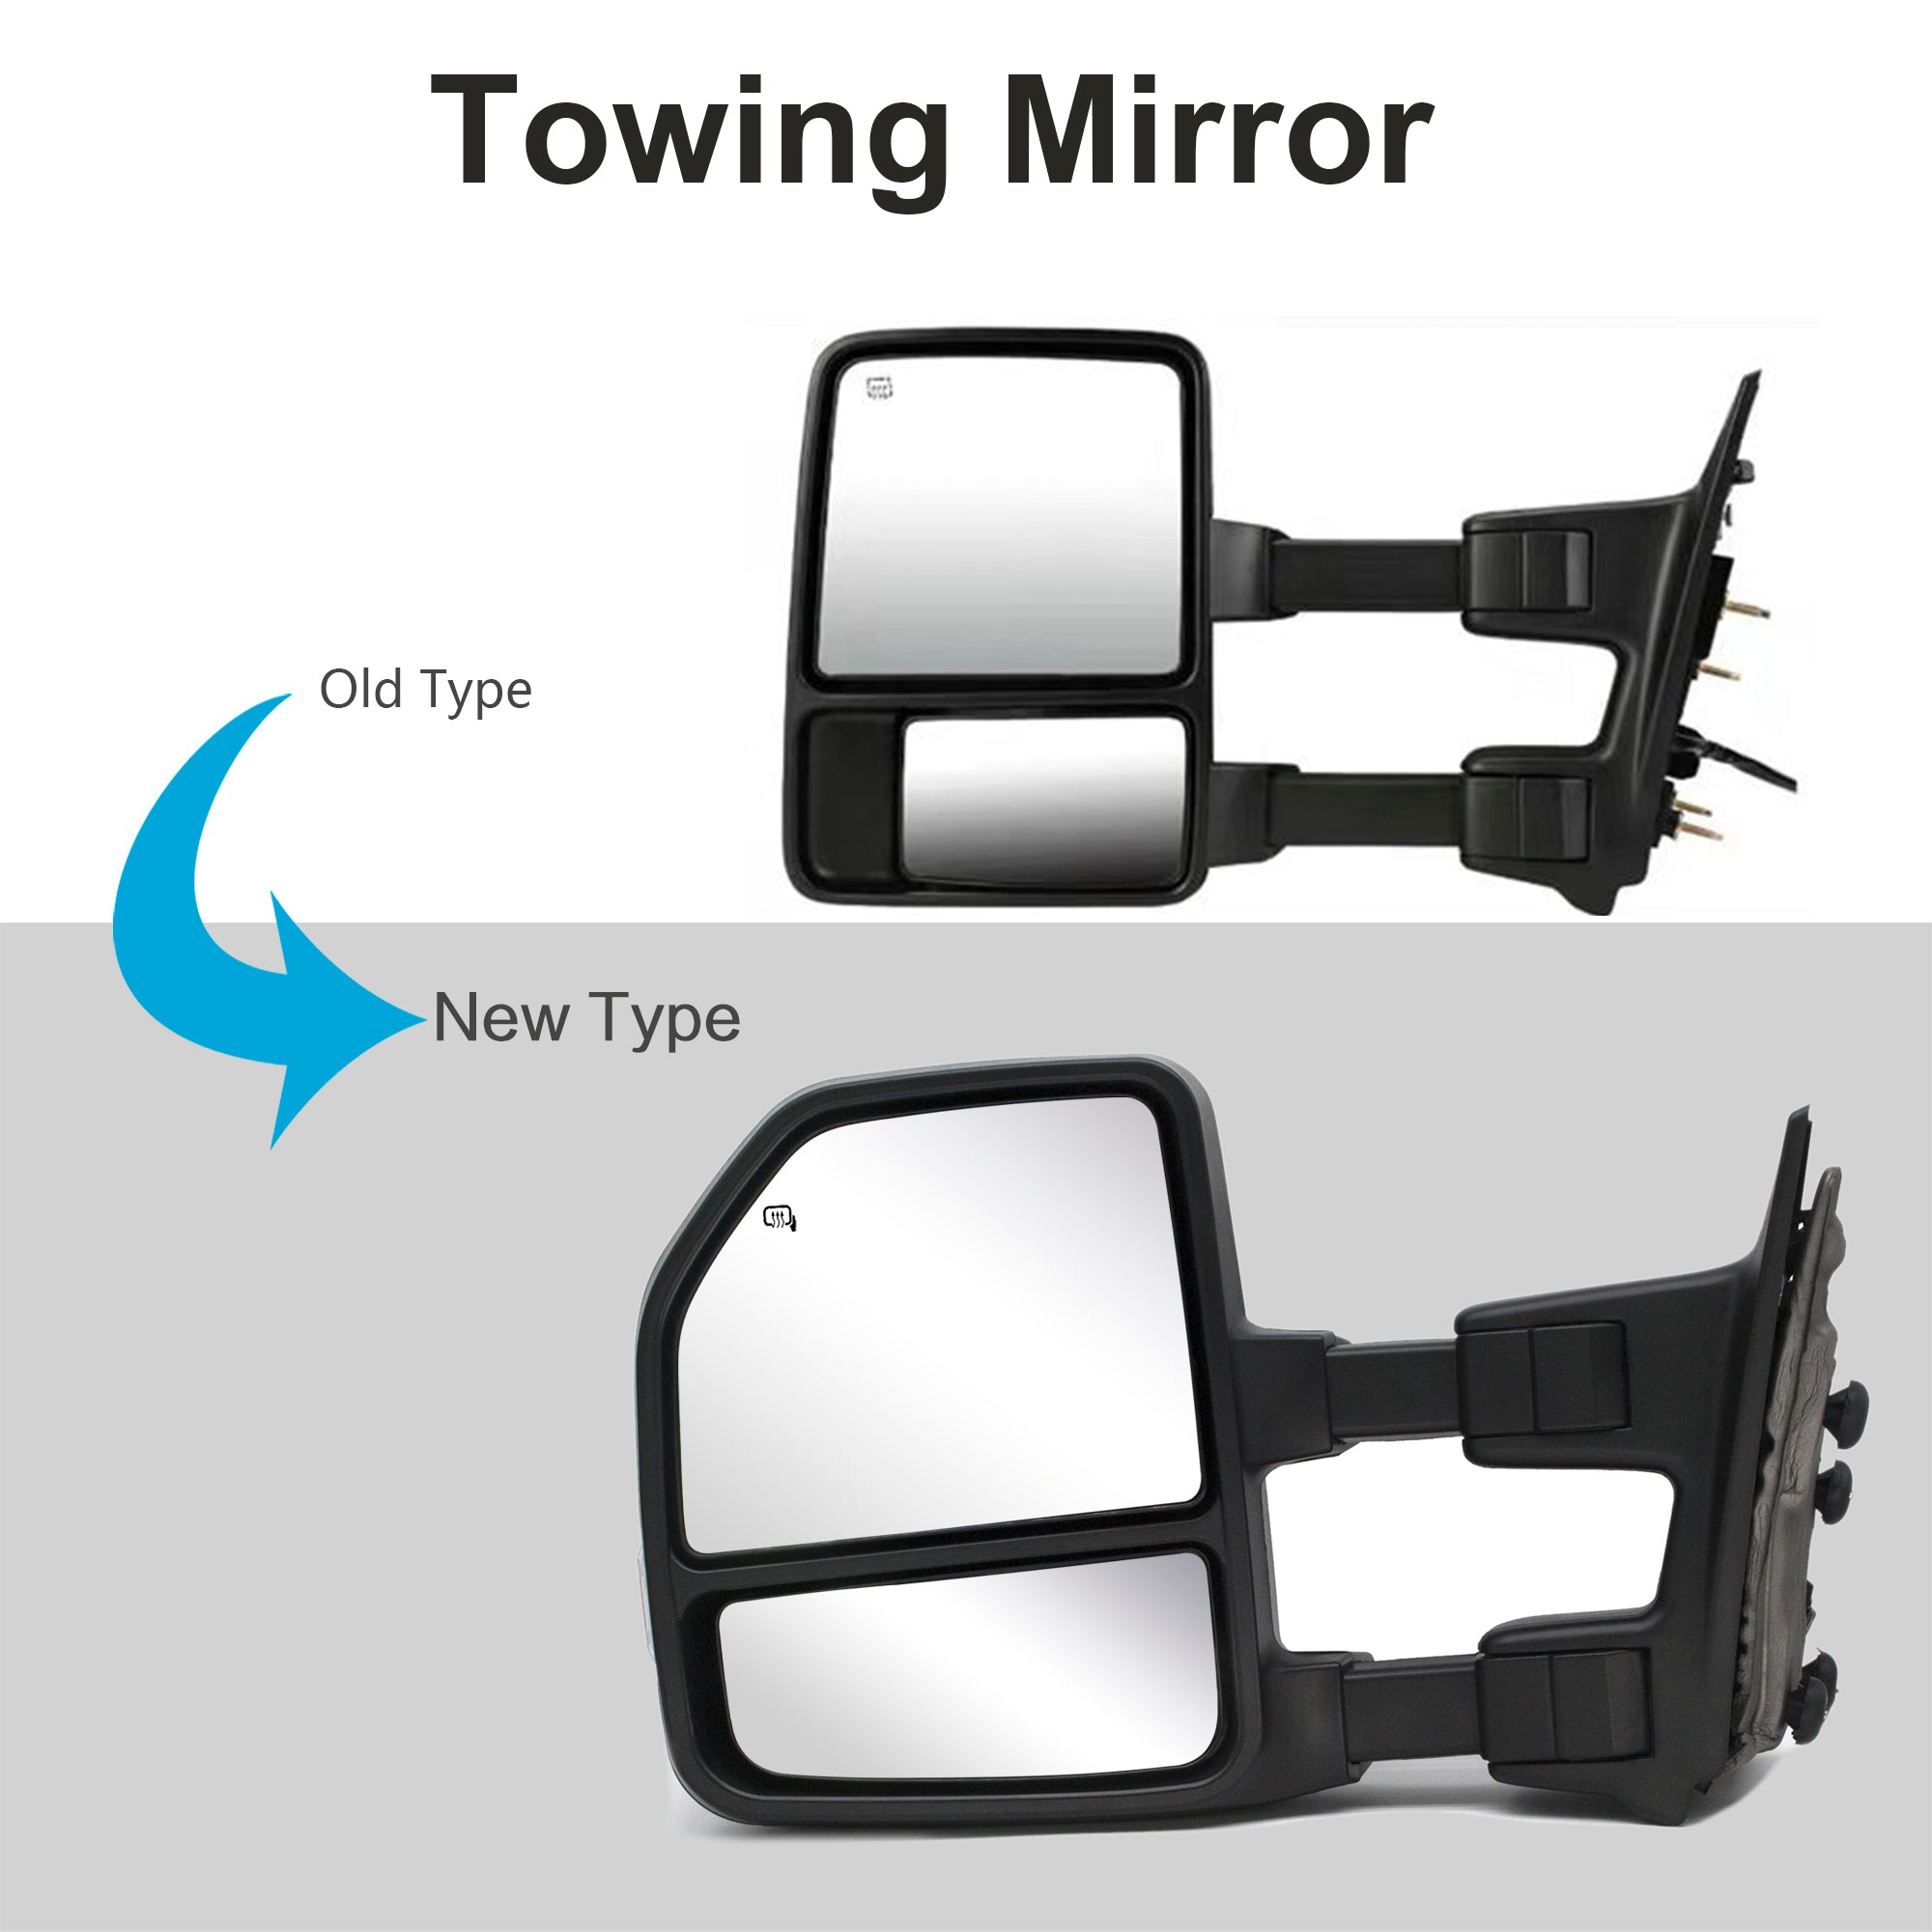 Towing Mirrors for 1999-2016 Ford F250 F350 F450 F550 Super Duty Manual Adjustment Glass Manual Extendable 18B